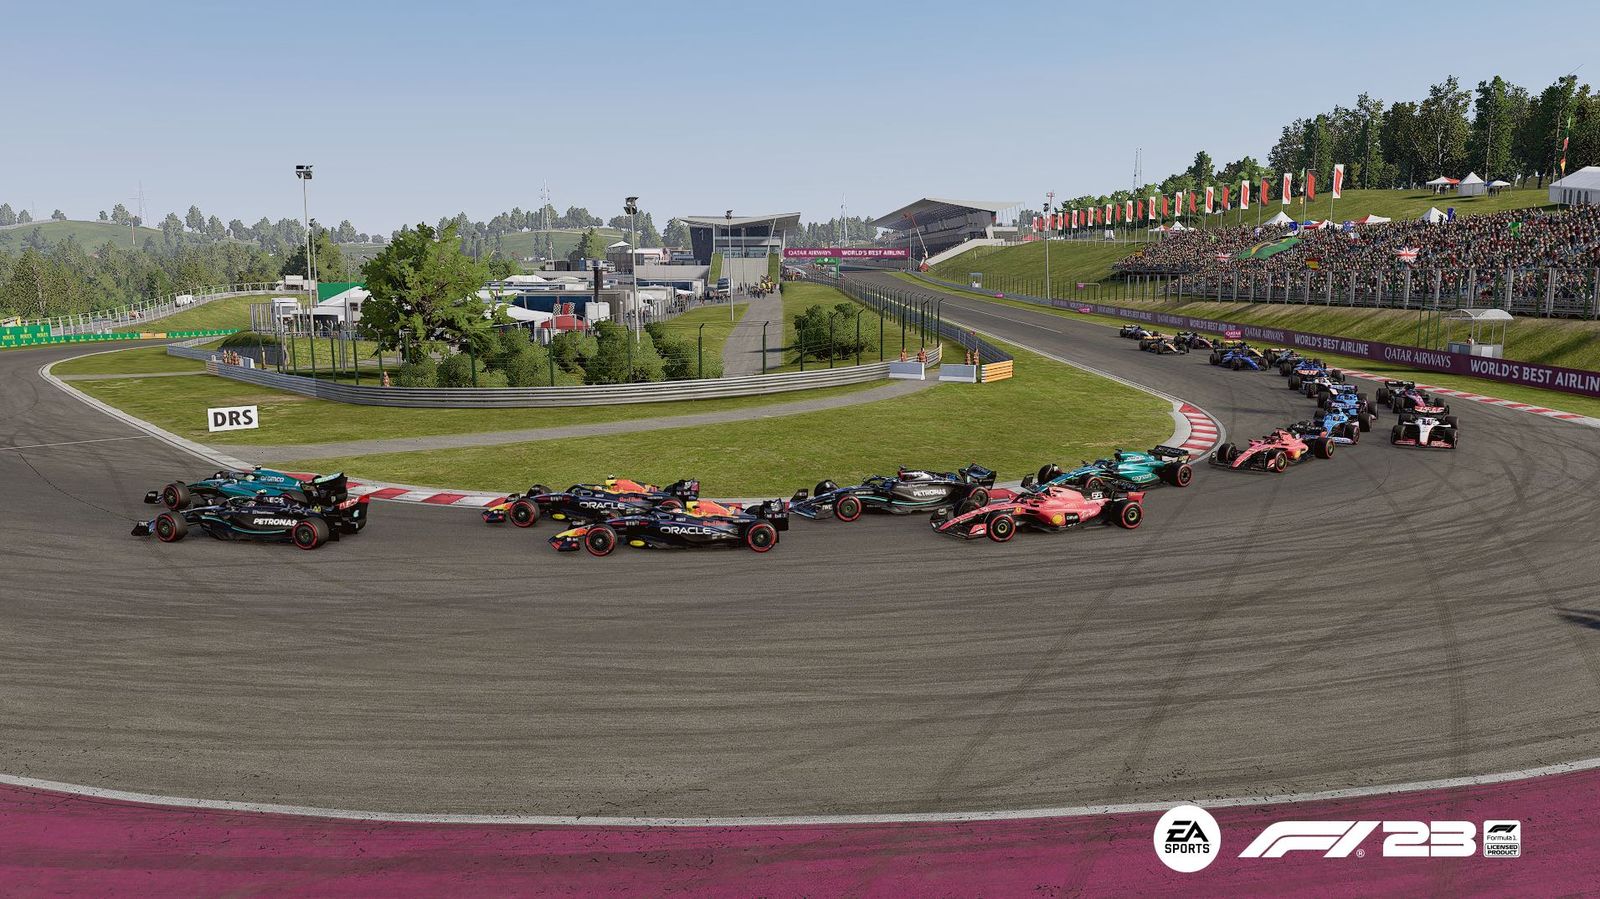 Turn 1 at Hungary in F1 23